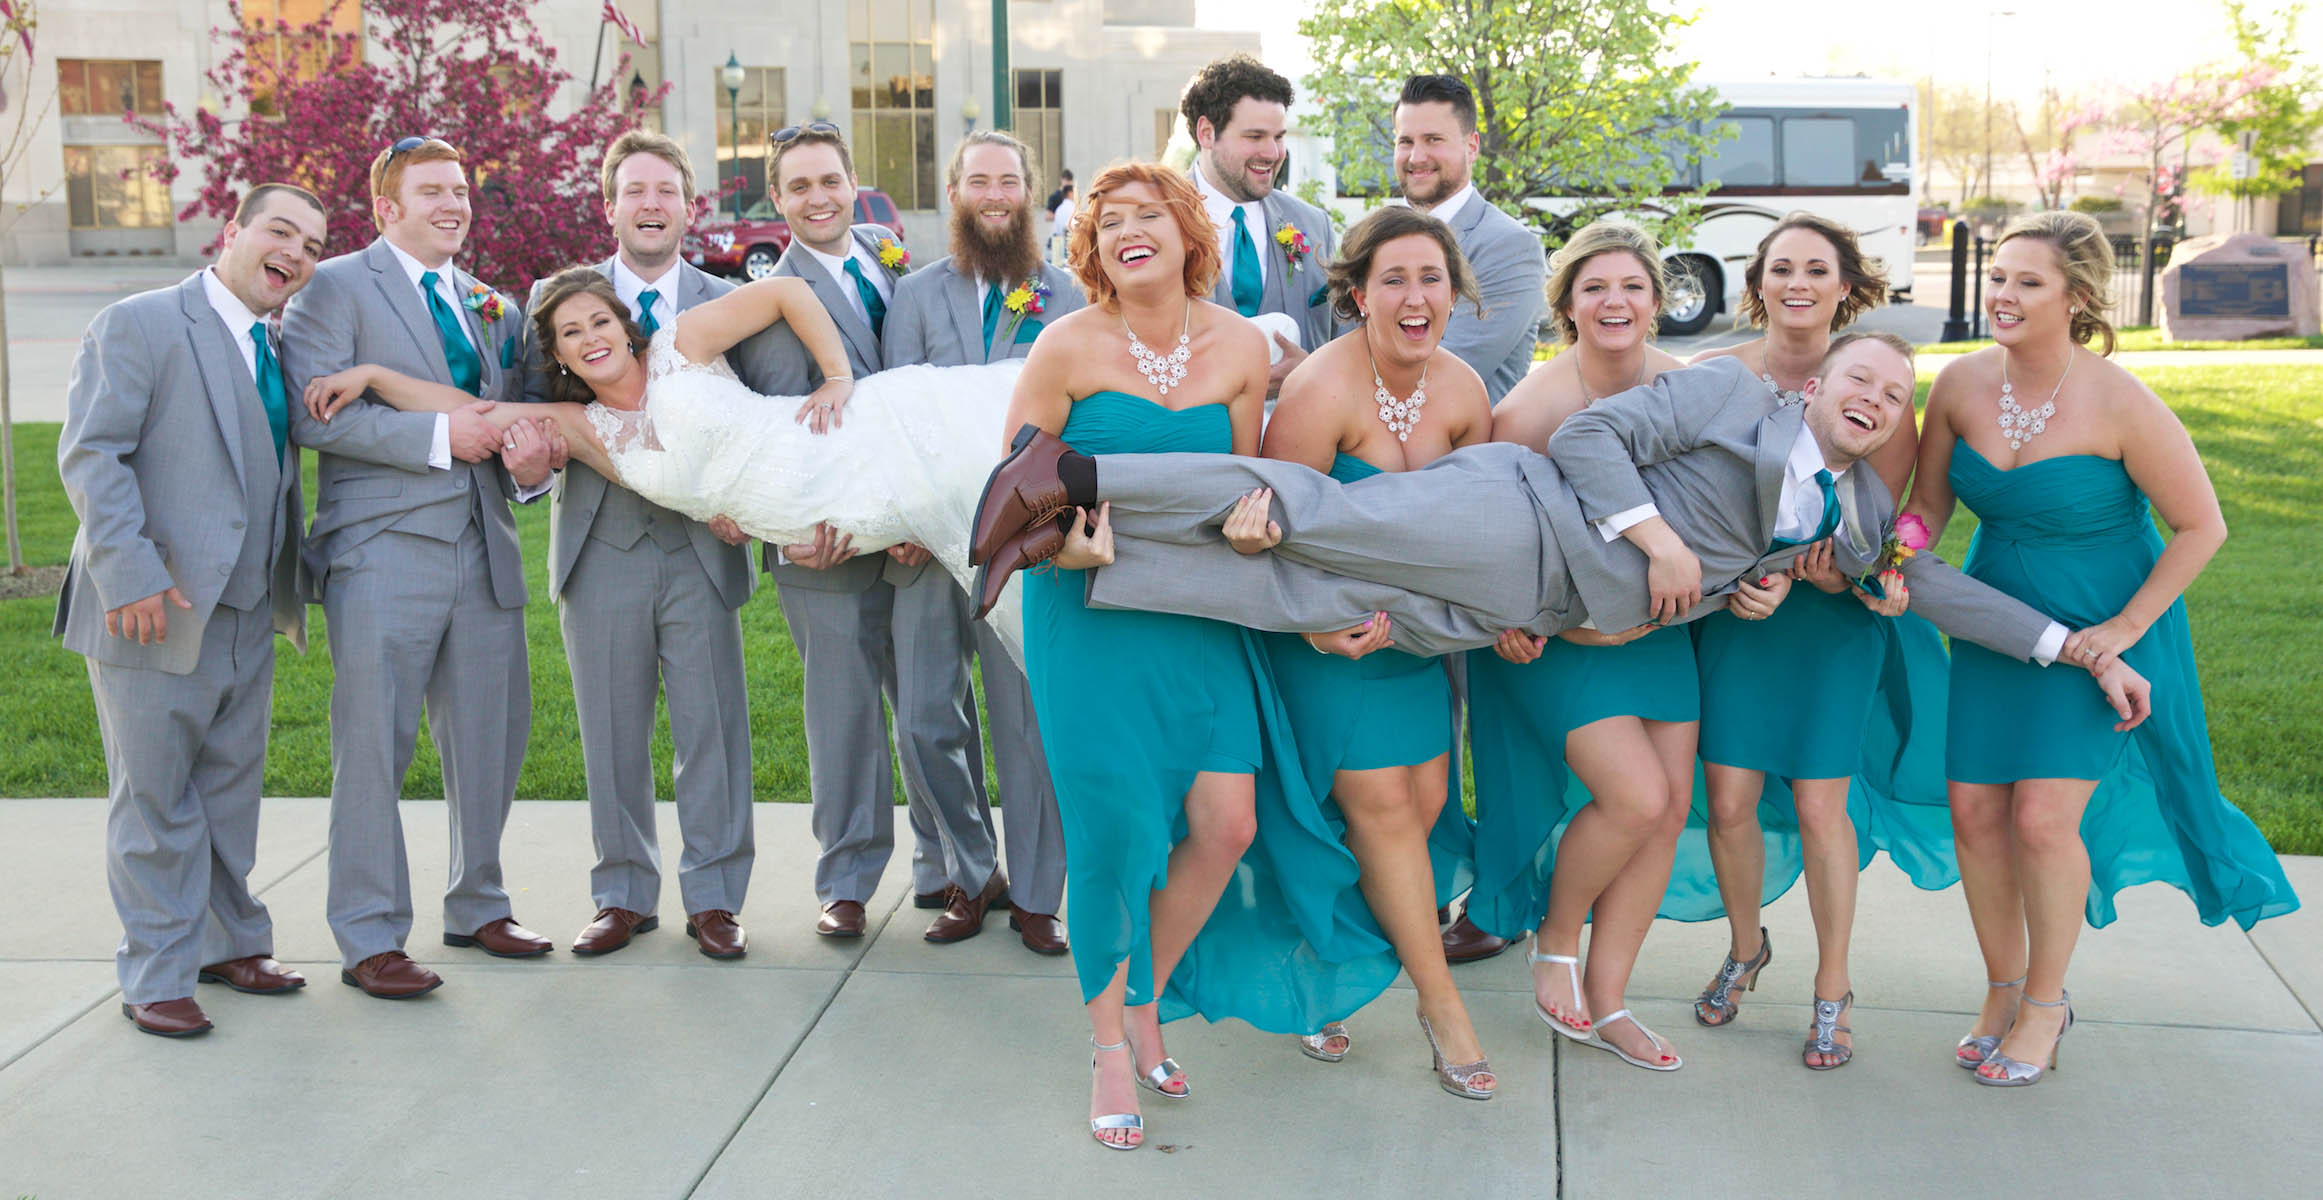 Wedding party tries a different pose, outdoor portaits in downtown Jacksonville. Wedding pictures by Tiffany & Steve of Warmowski Photography.